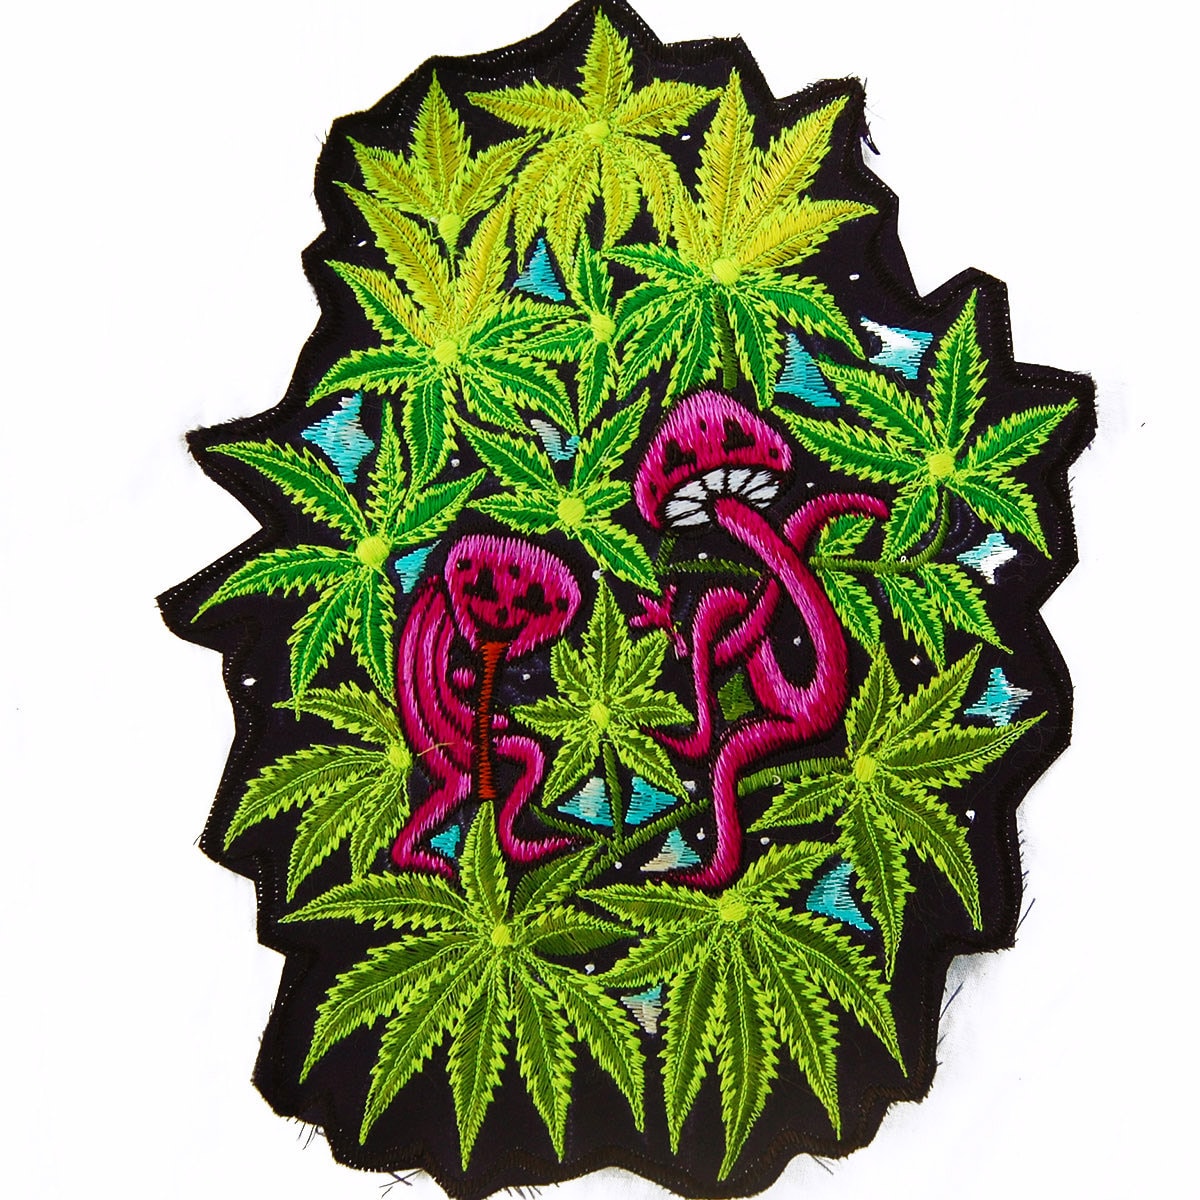 magic mushroom weed party - Design your jacket in any colours -handmade in your size blacklight active 1 zip lock inside pocket